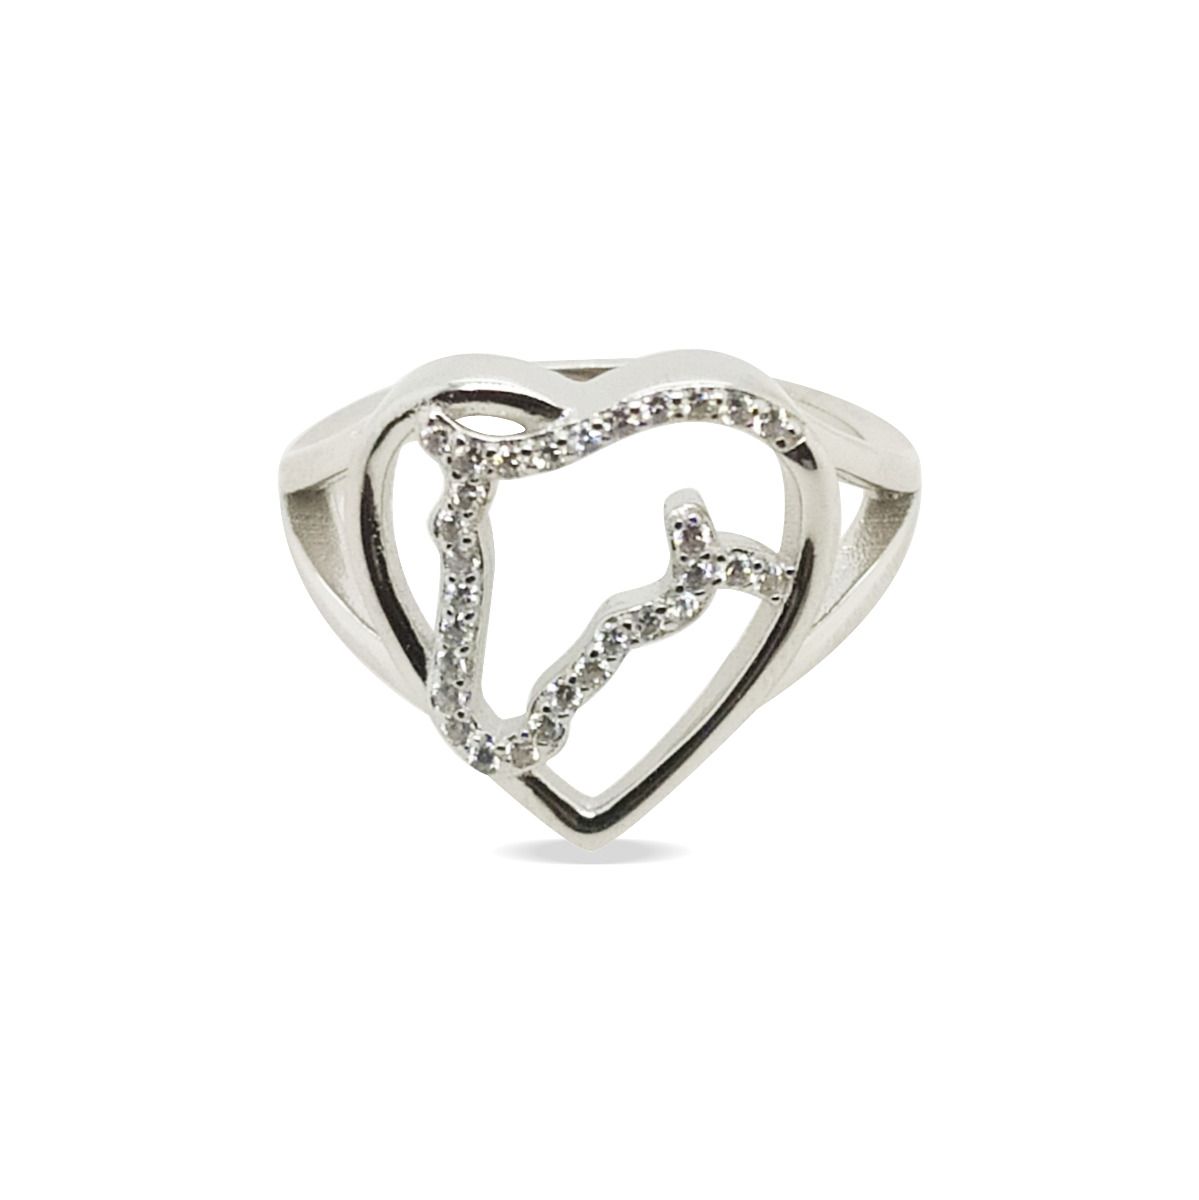 RING S/S & CZ HORSE IN HEART